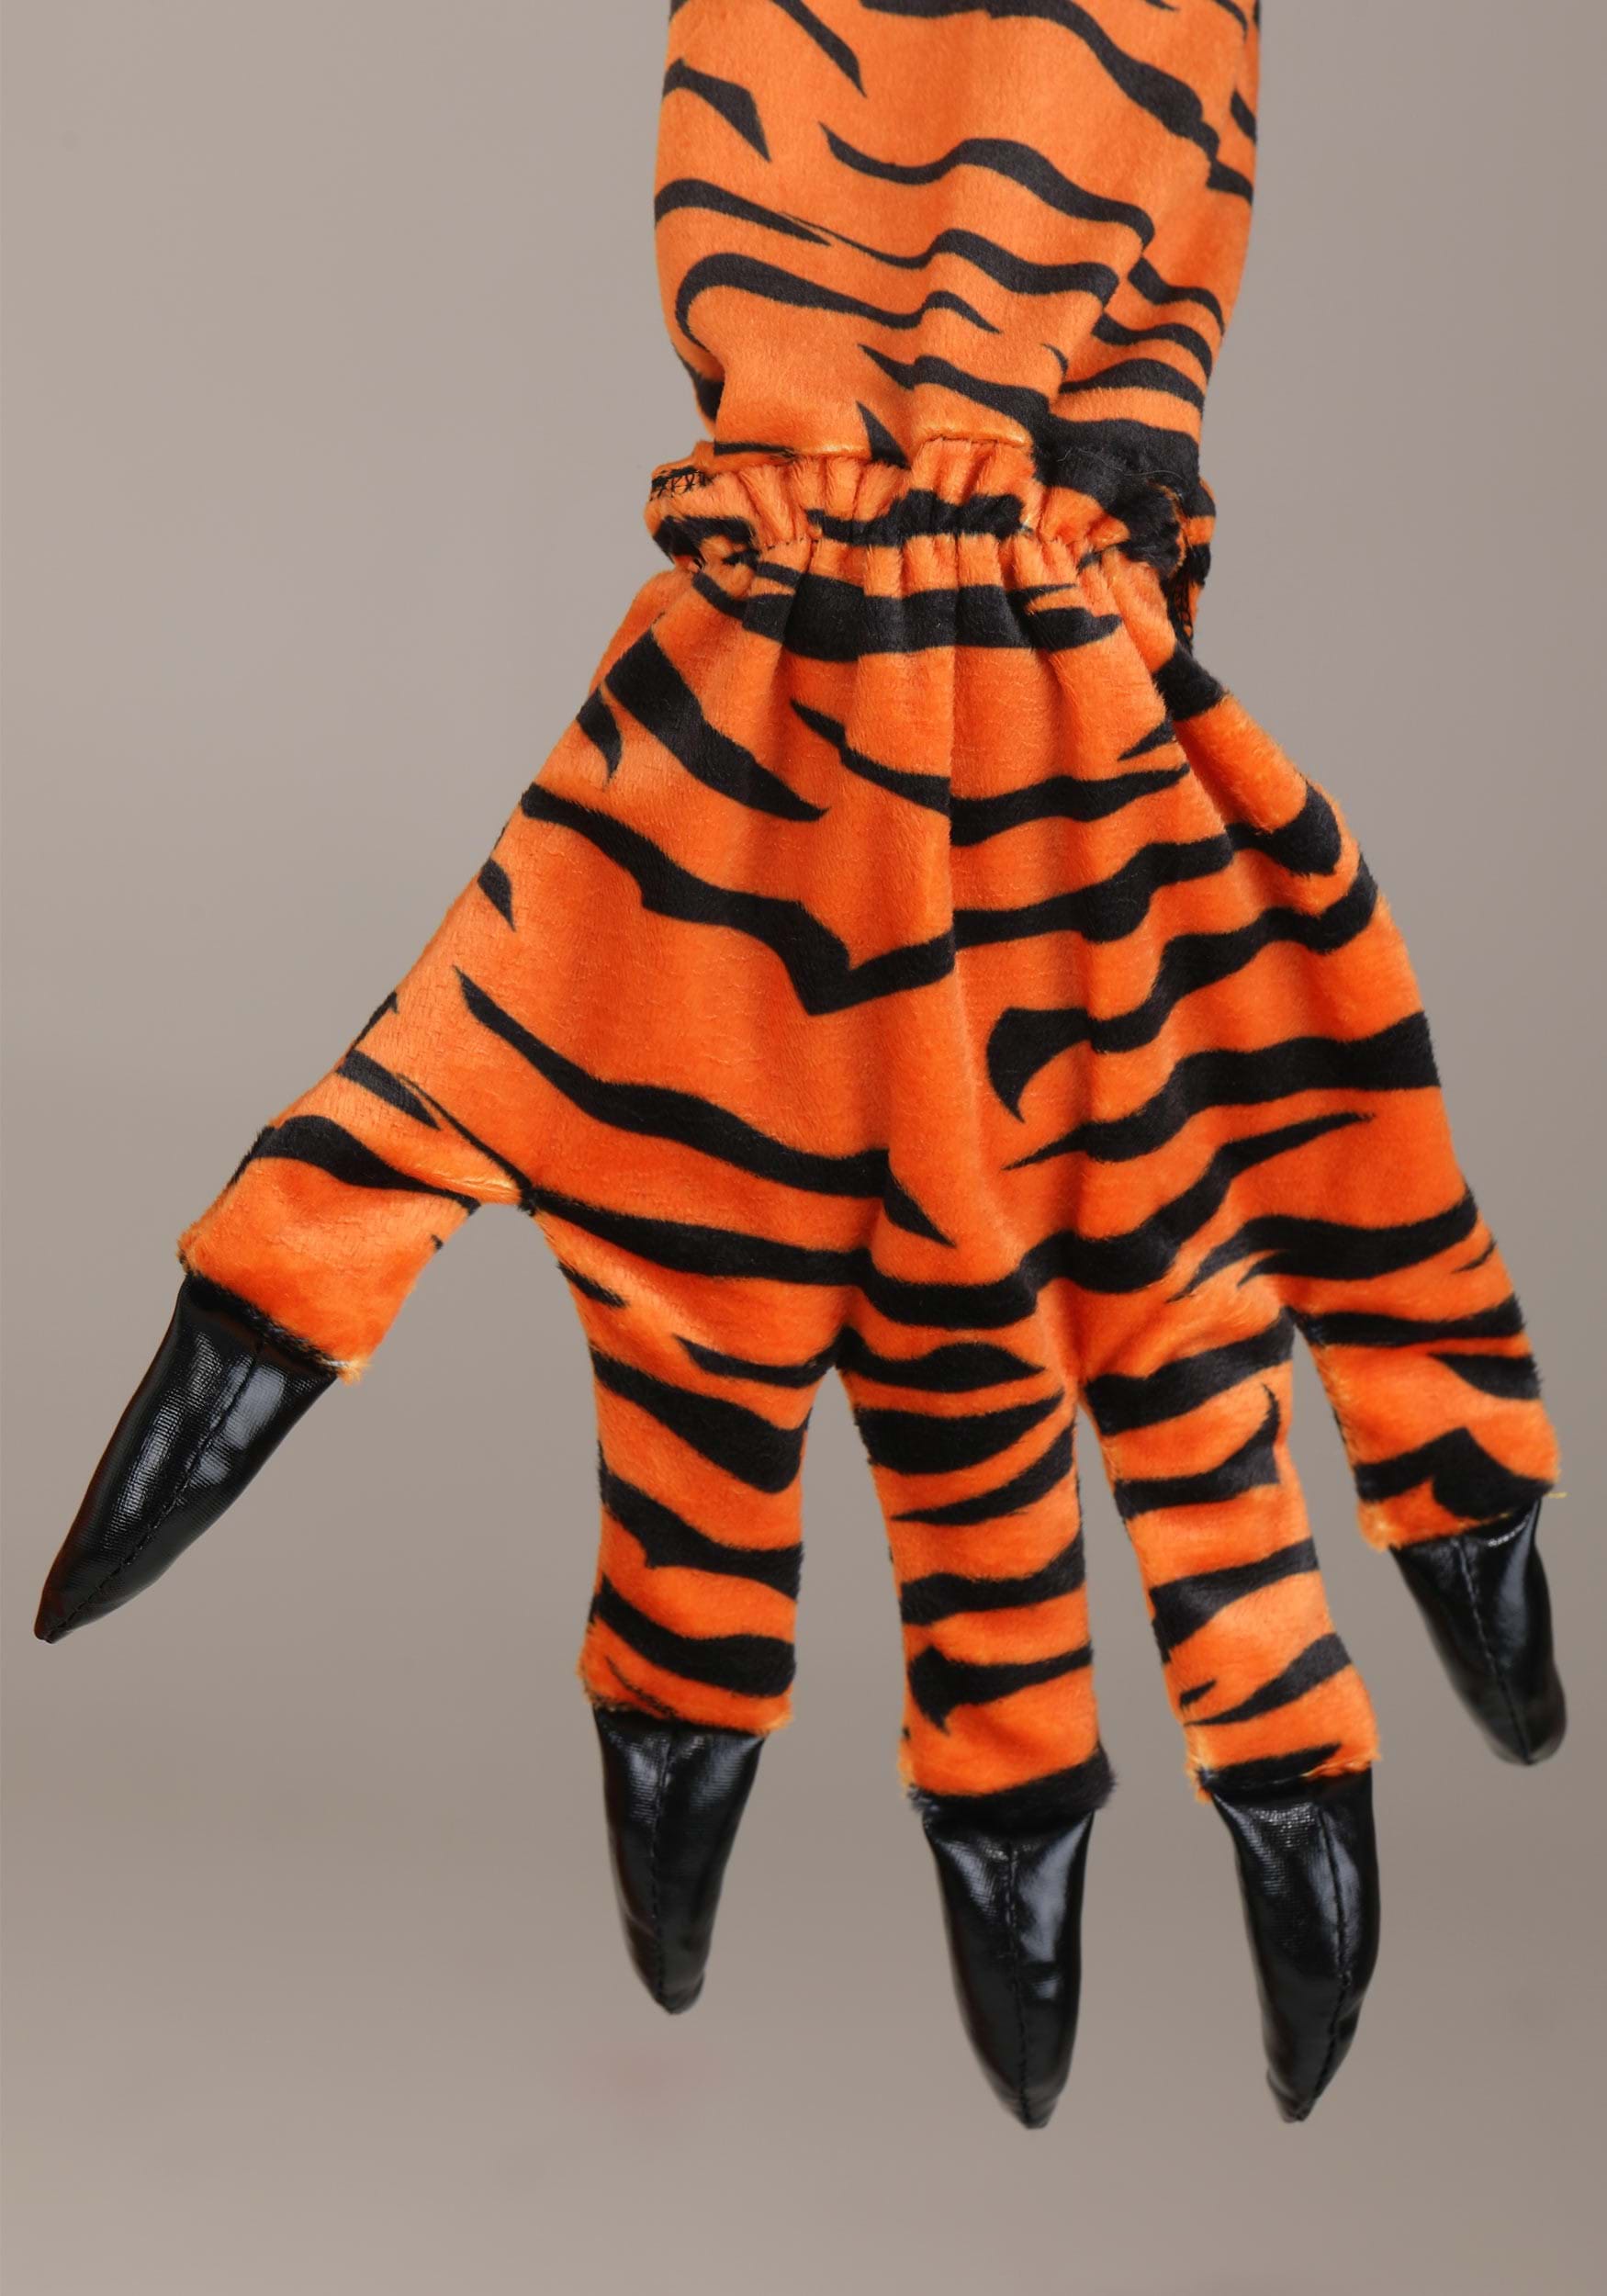 Tiger Jawesome Kid's Costume